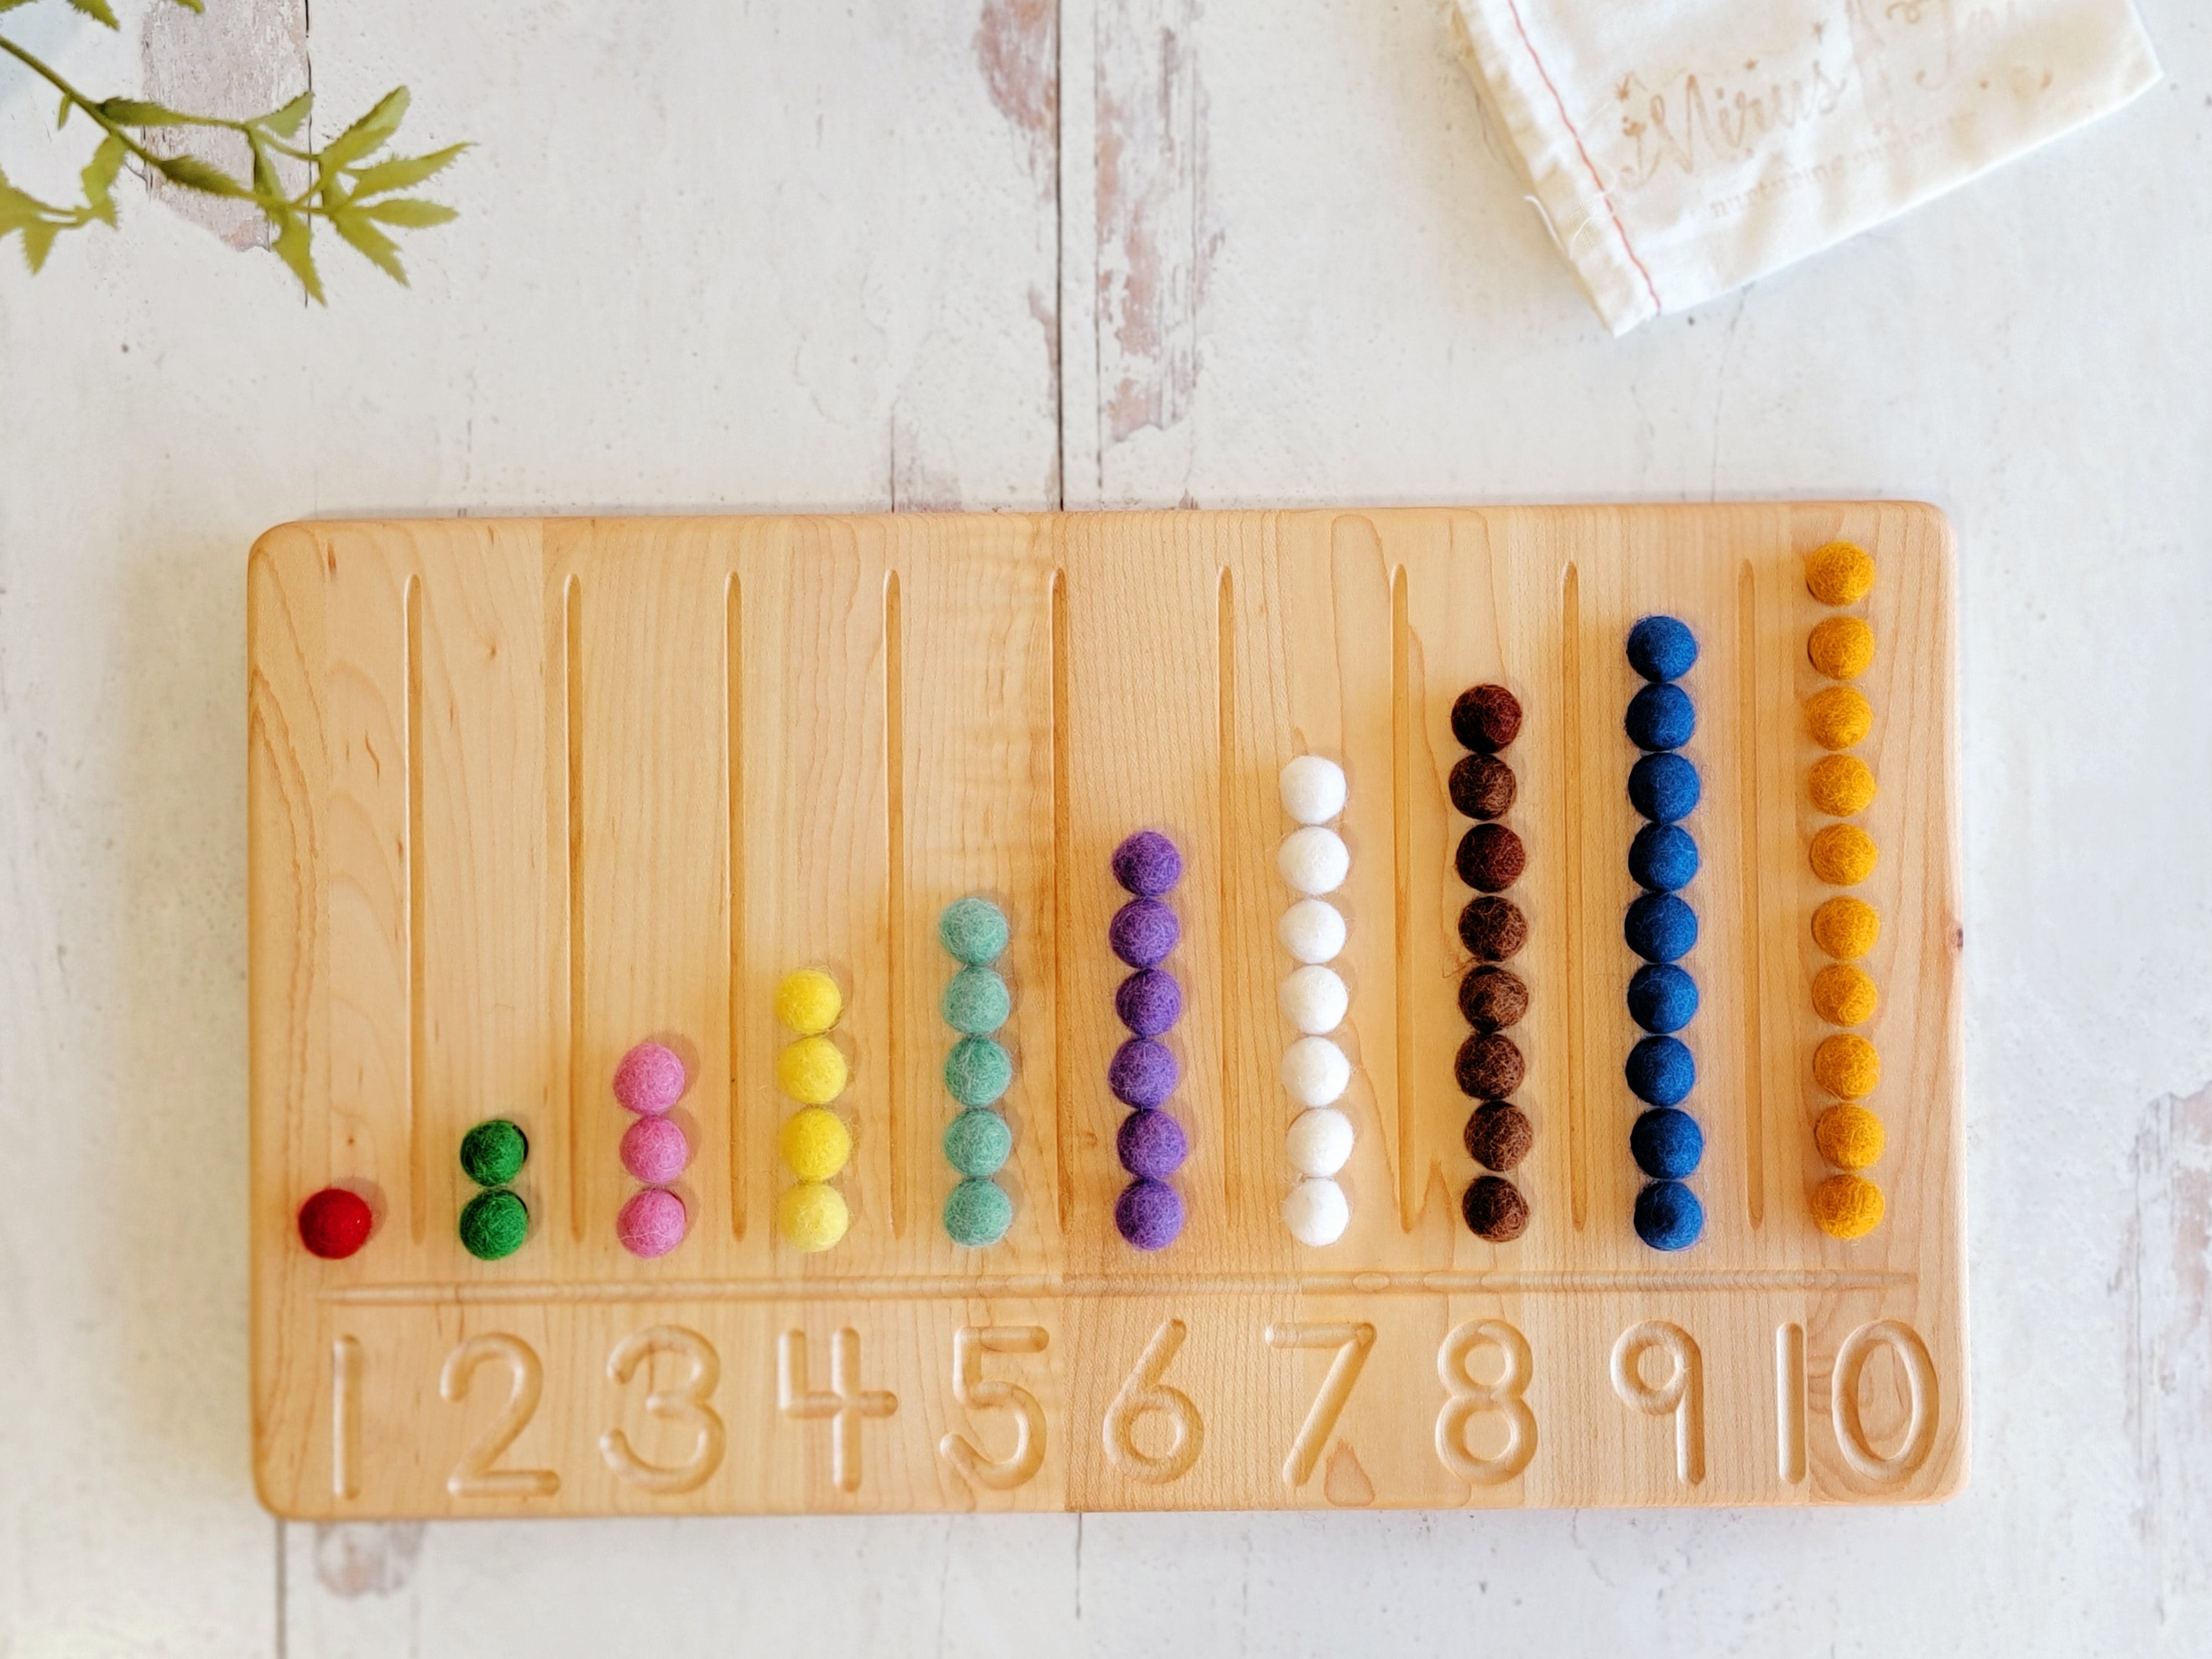 Blue Ginkgo Number Sorting Tray - Wooden Counting, Sorting and Number Tracing Toy - Montessori Stem Math Counting Toys for Preschool Math - Toddler